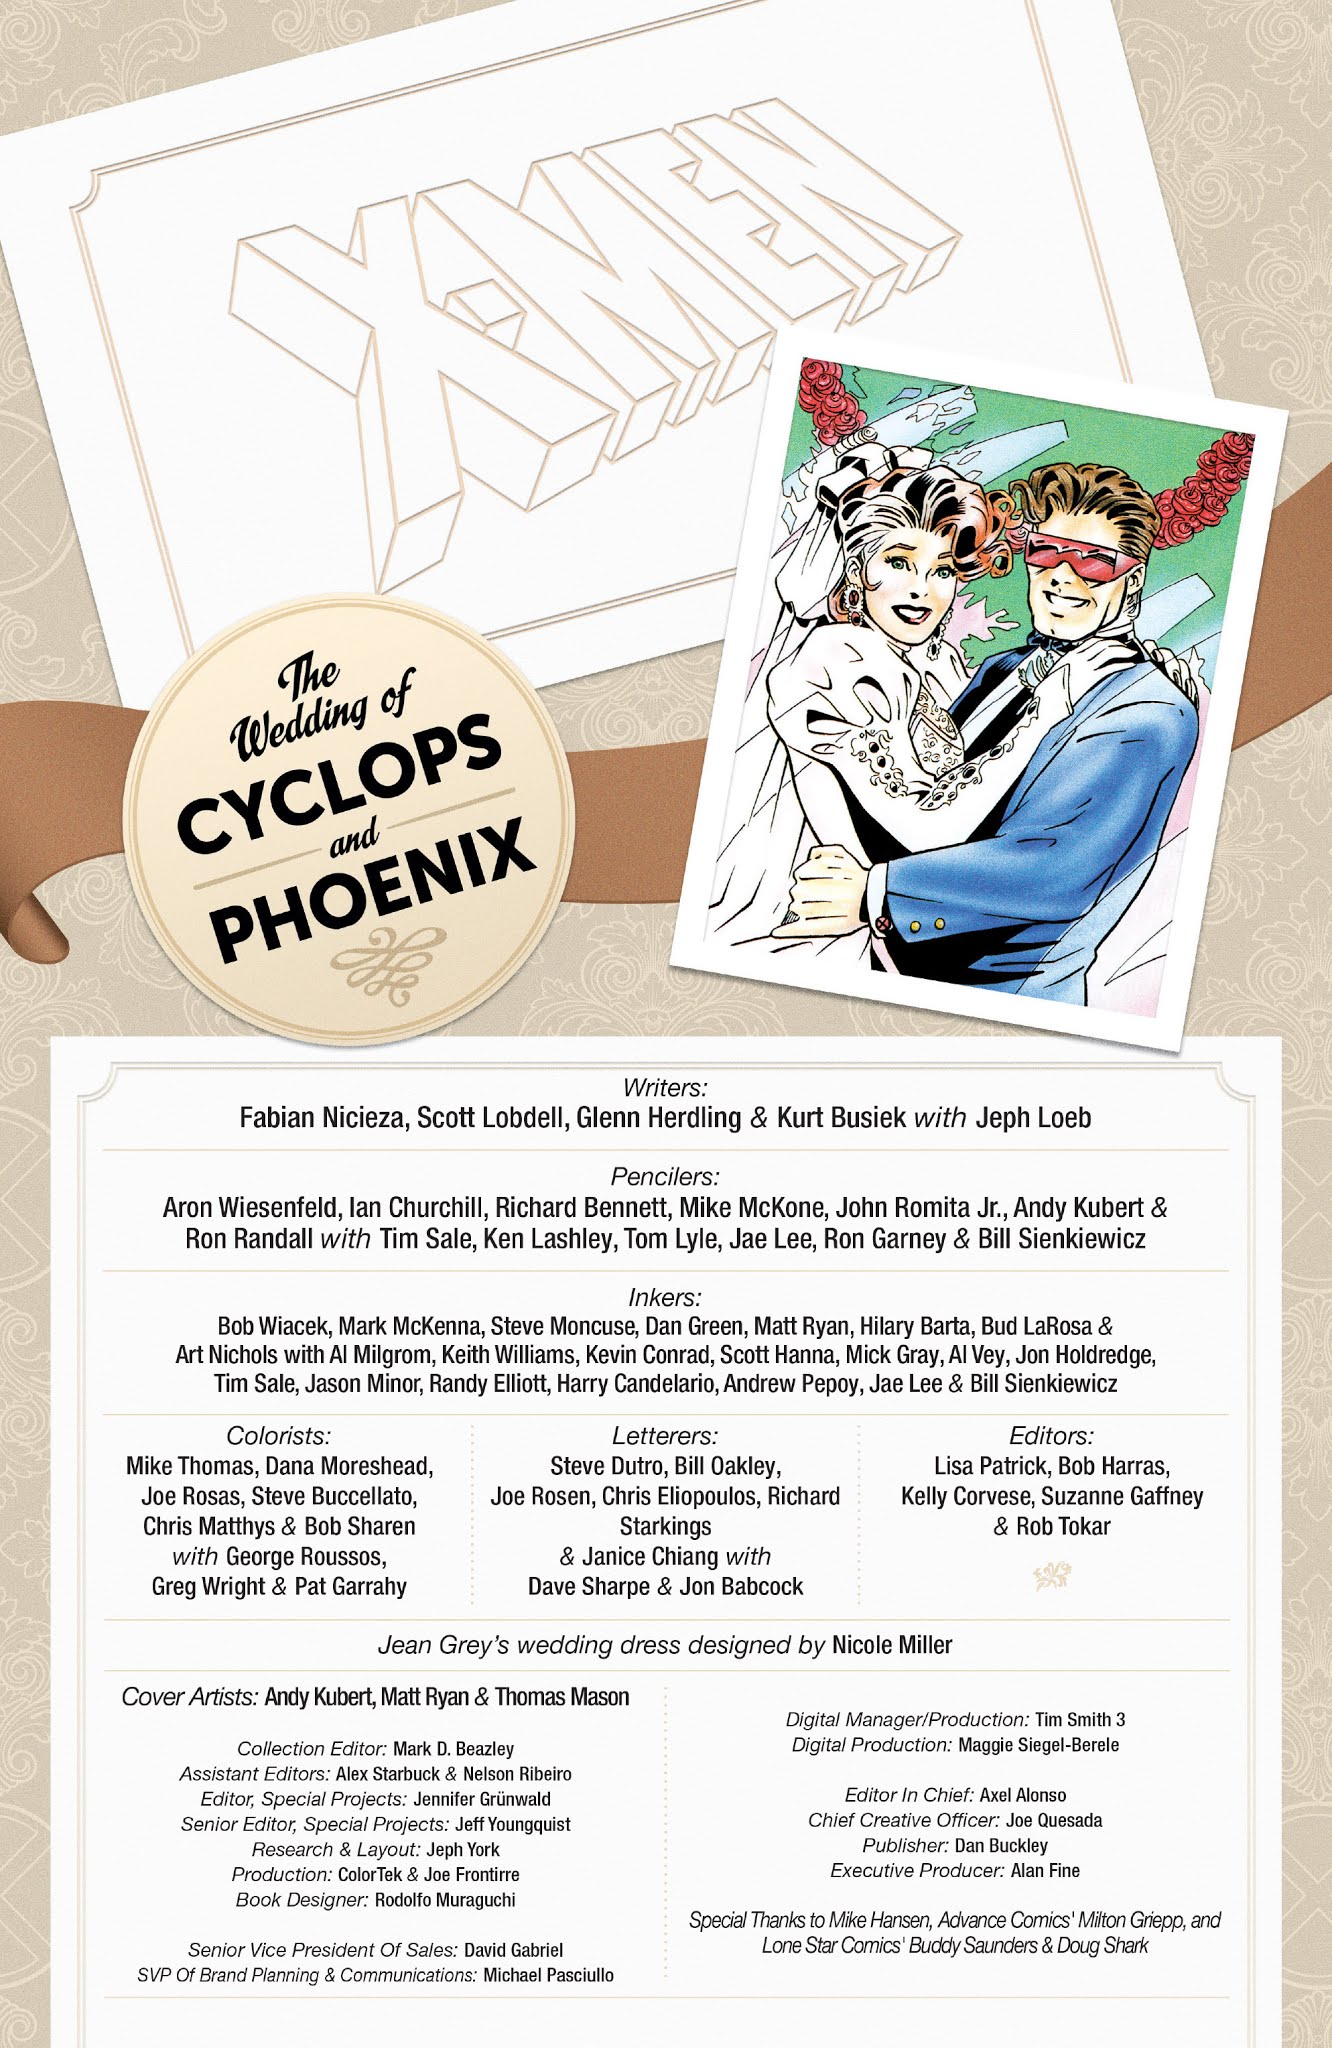 Read online X-Men: The Wedding of Cyclops and Phoenix comic -  Issue # TPB Part 1 - 2